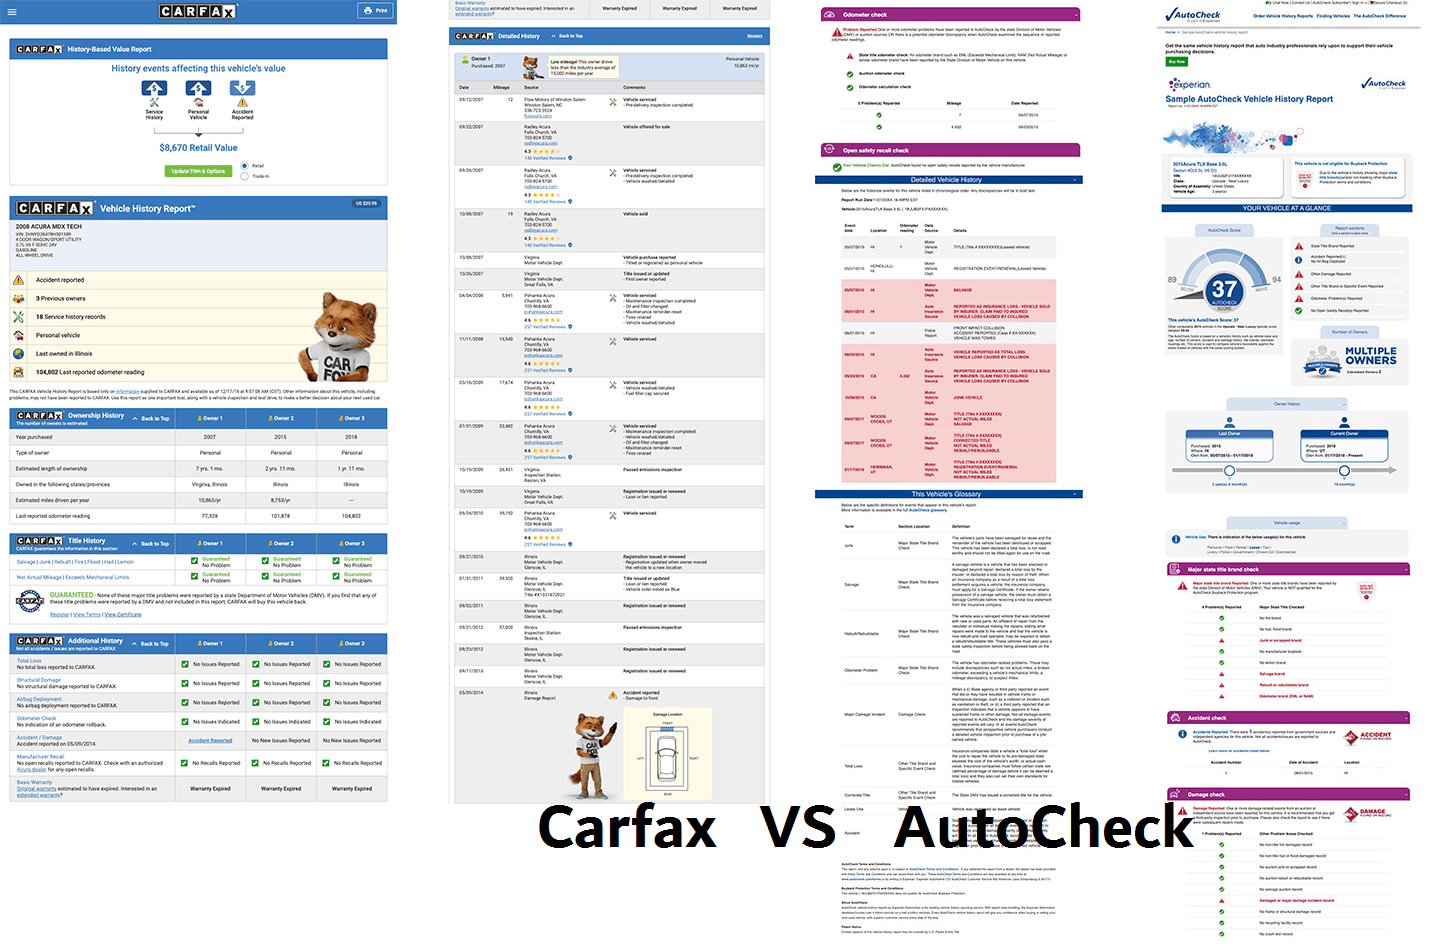 autocheck vs carfax side by side reports